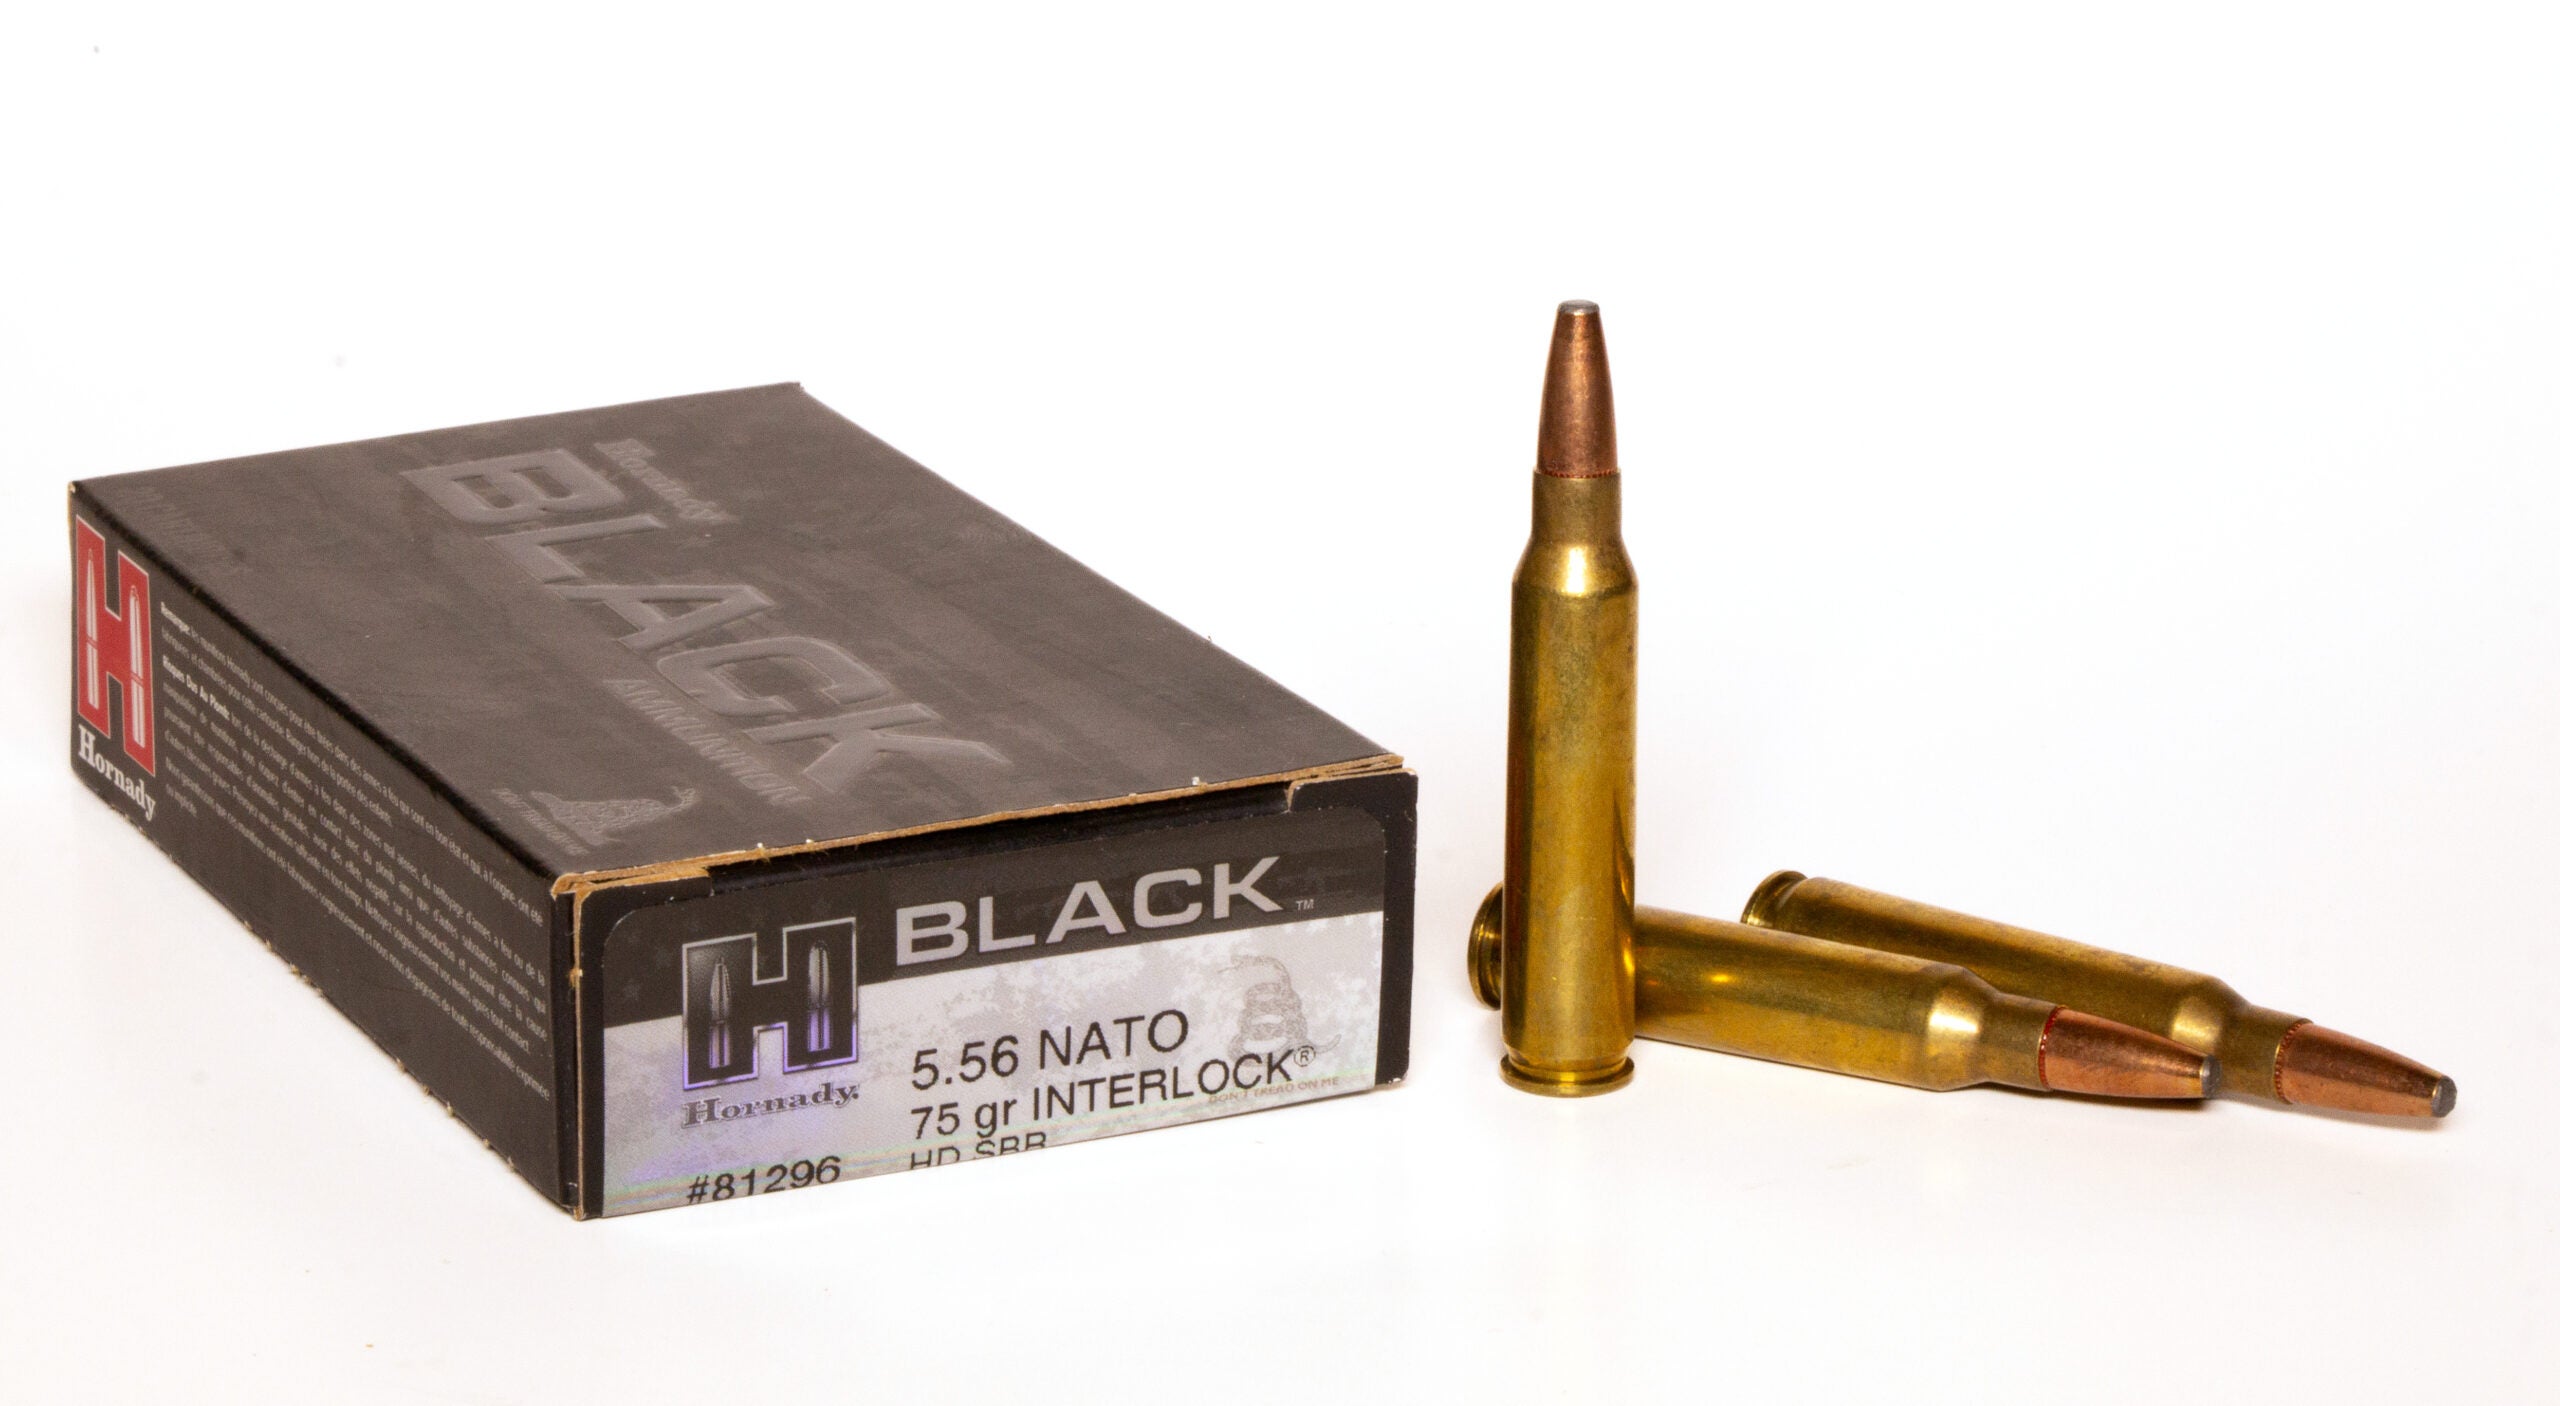 Box of 5.54 NATO ammo with three loose cartridges on white background